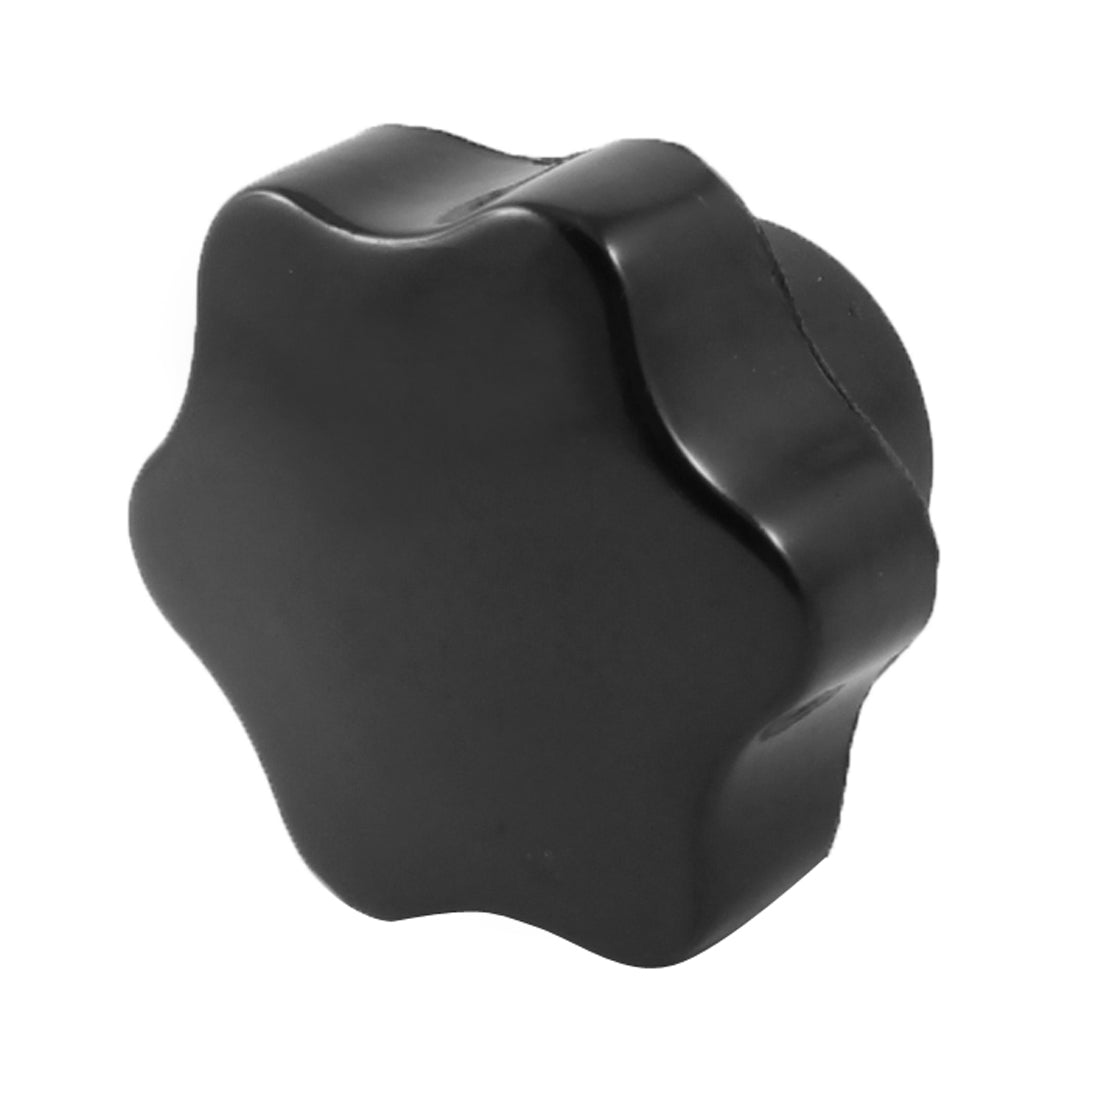 uxcell Uxcell 50mm Diameter M8 Female Thread Metal Clamping Star Knob Black Replacement